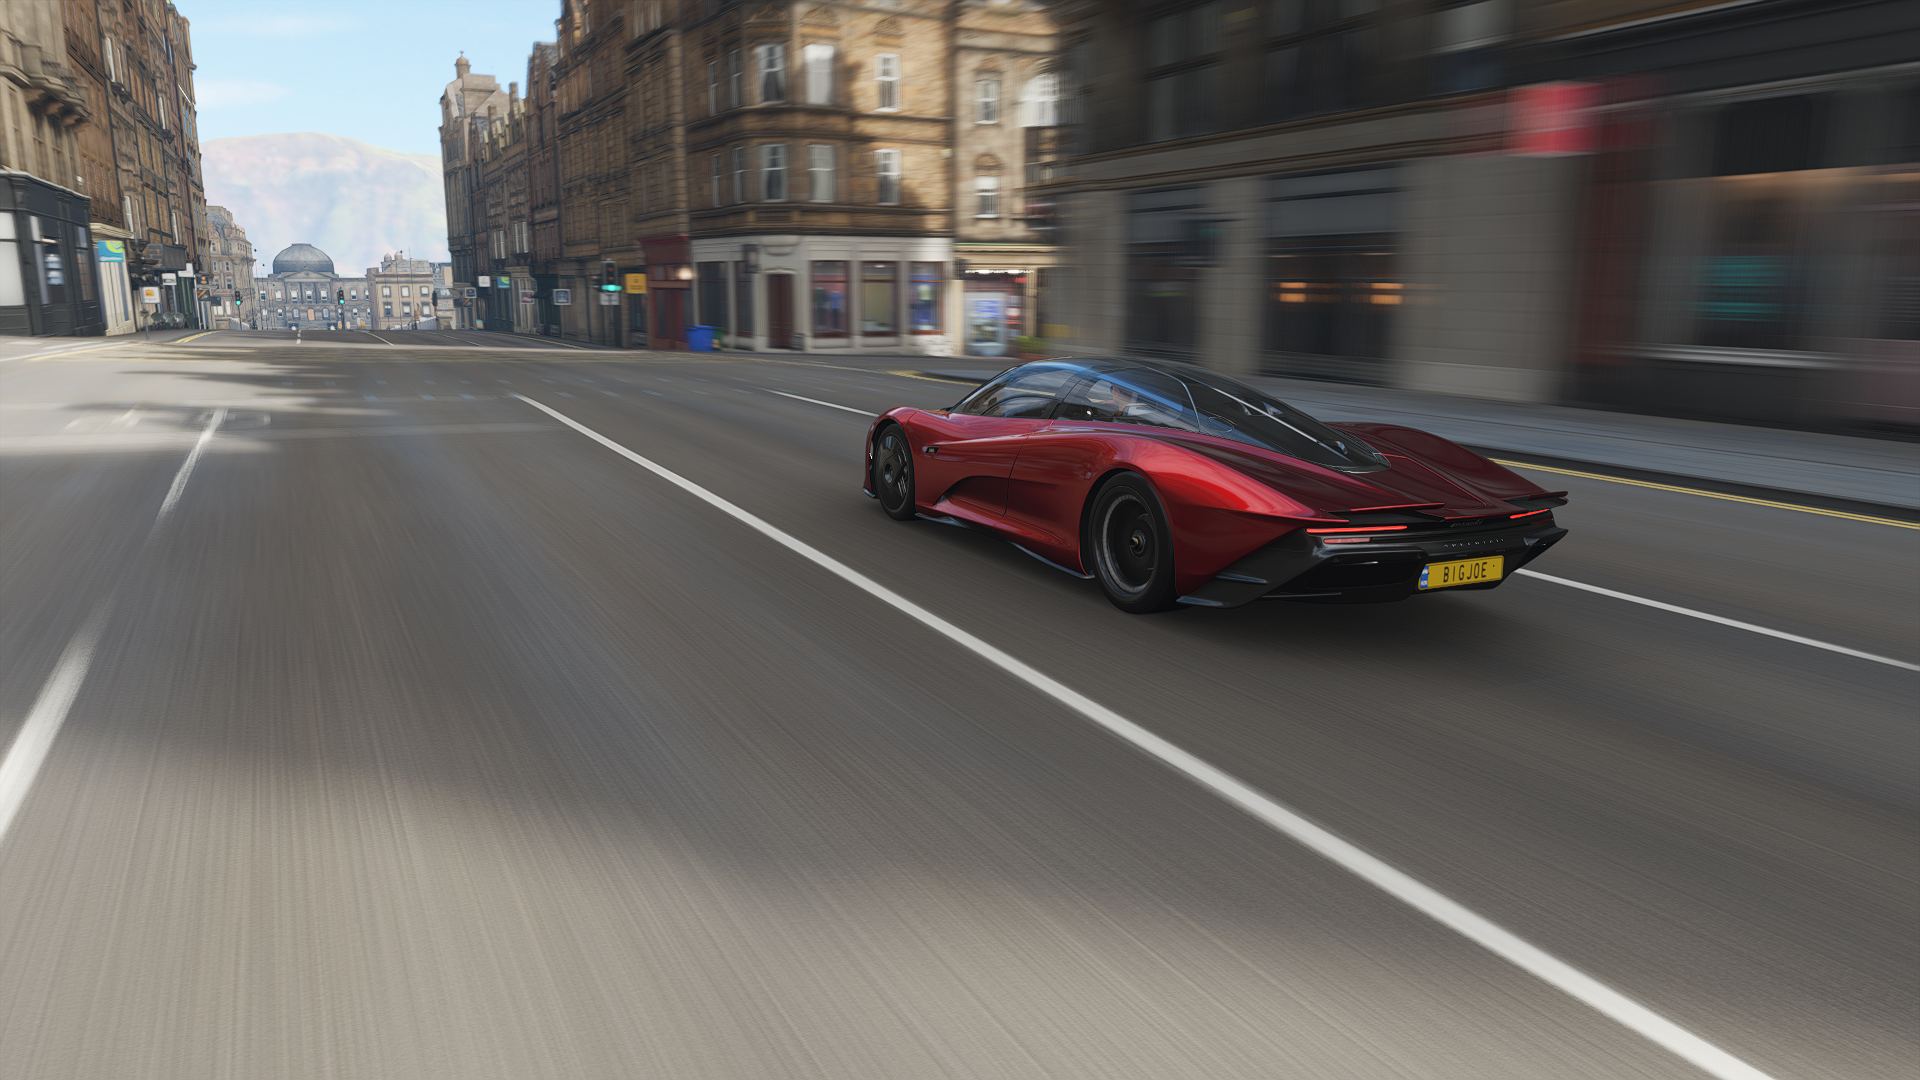 General 1920x1080 Forza Forza Horizon 4 racing car Forza Horizon McLaren Speedtail Speedtail video games CGI road building blurred blurry background rear view taillights licence plates British cars PlaygroundGames